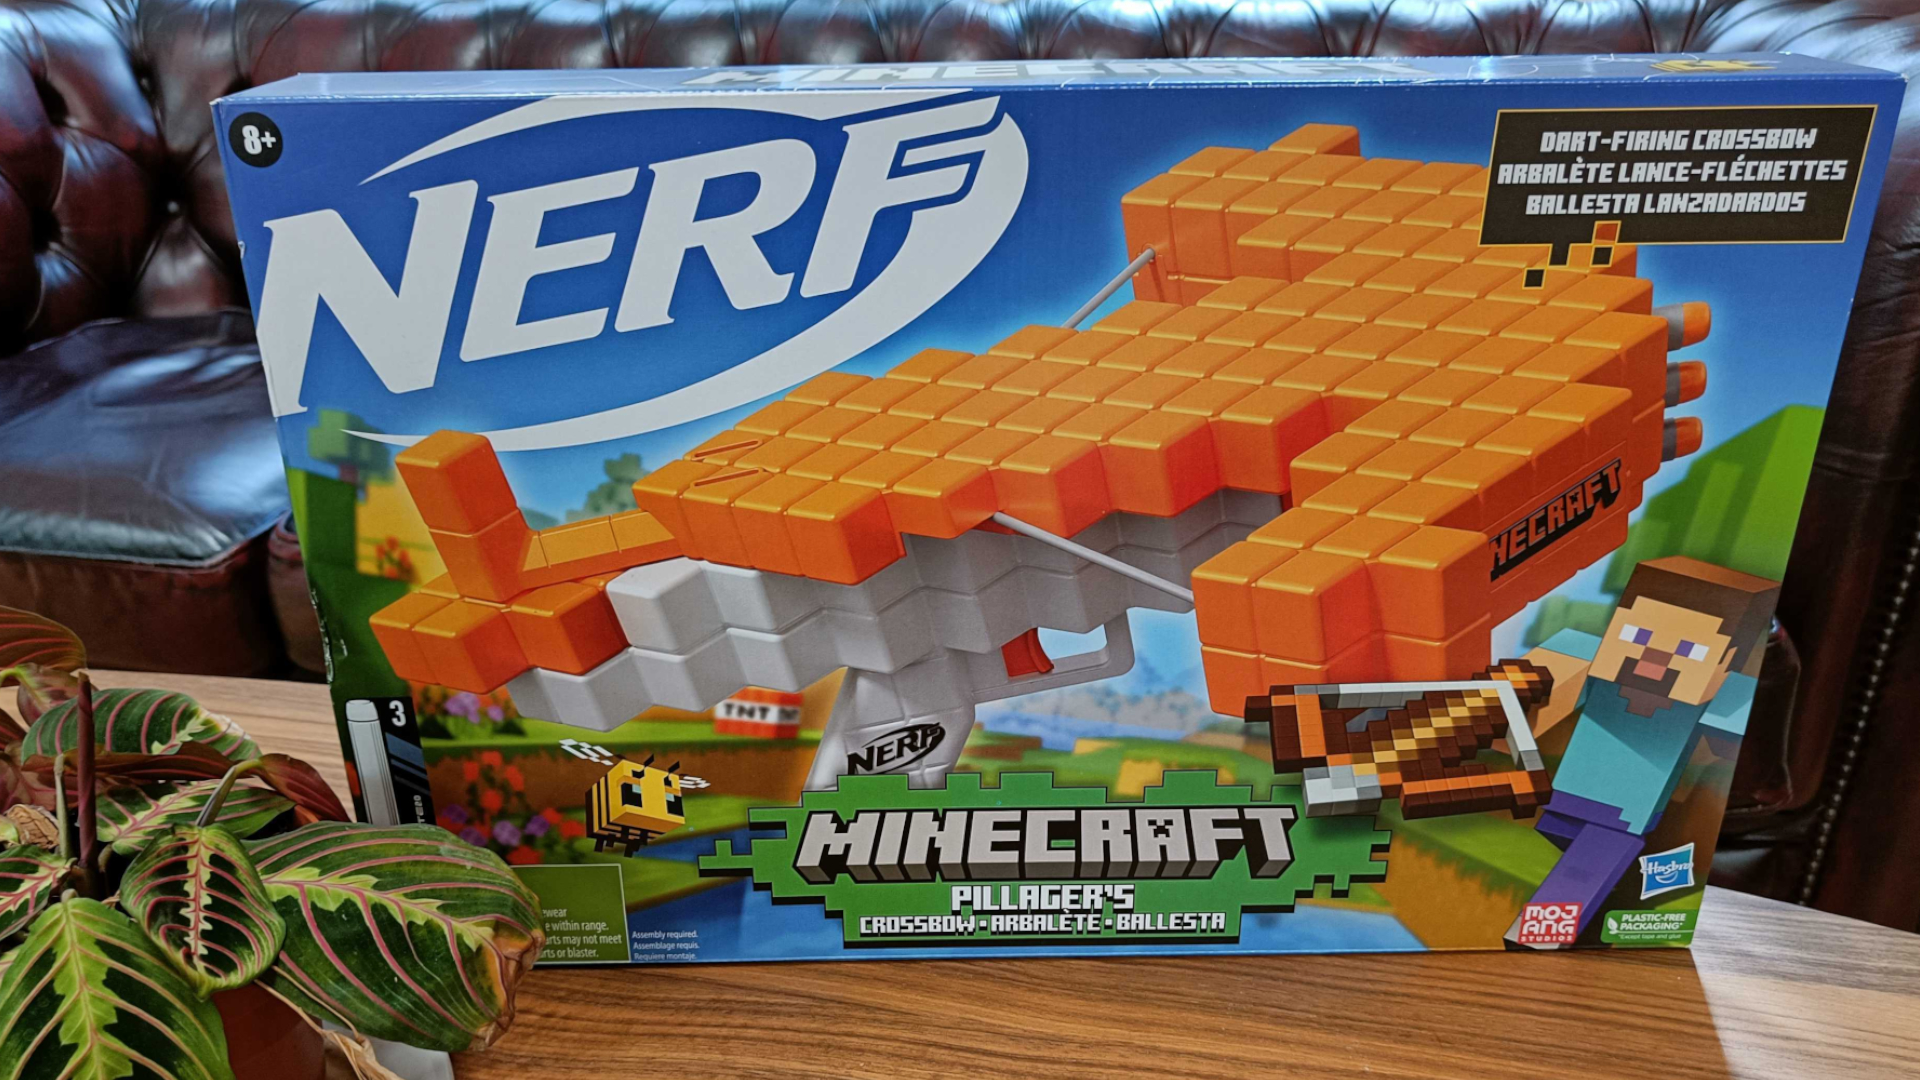 Nerf Minecraft Pillager's Crossbow review